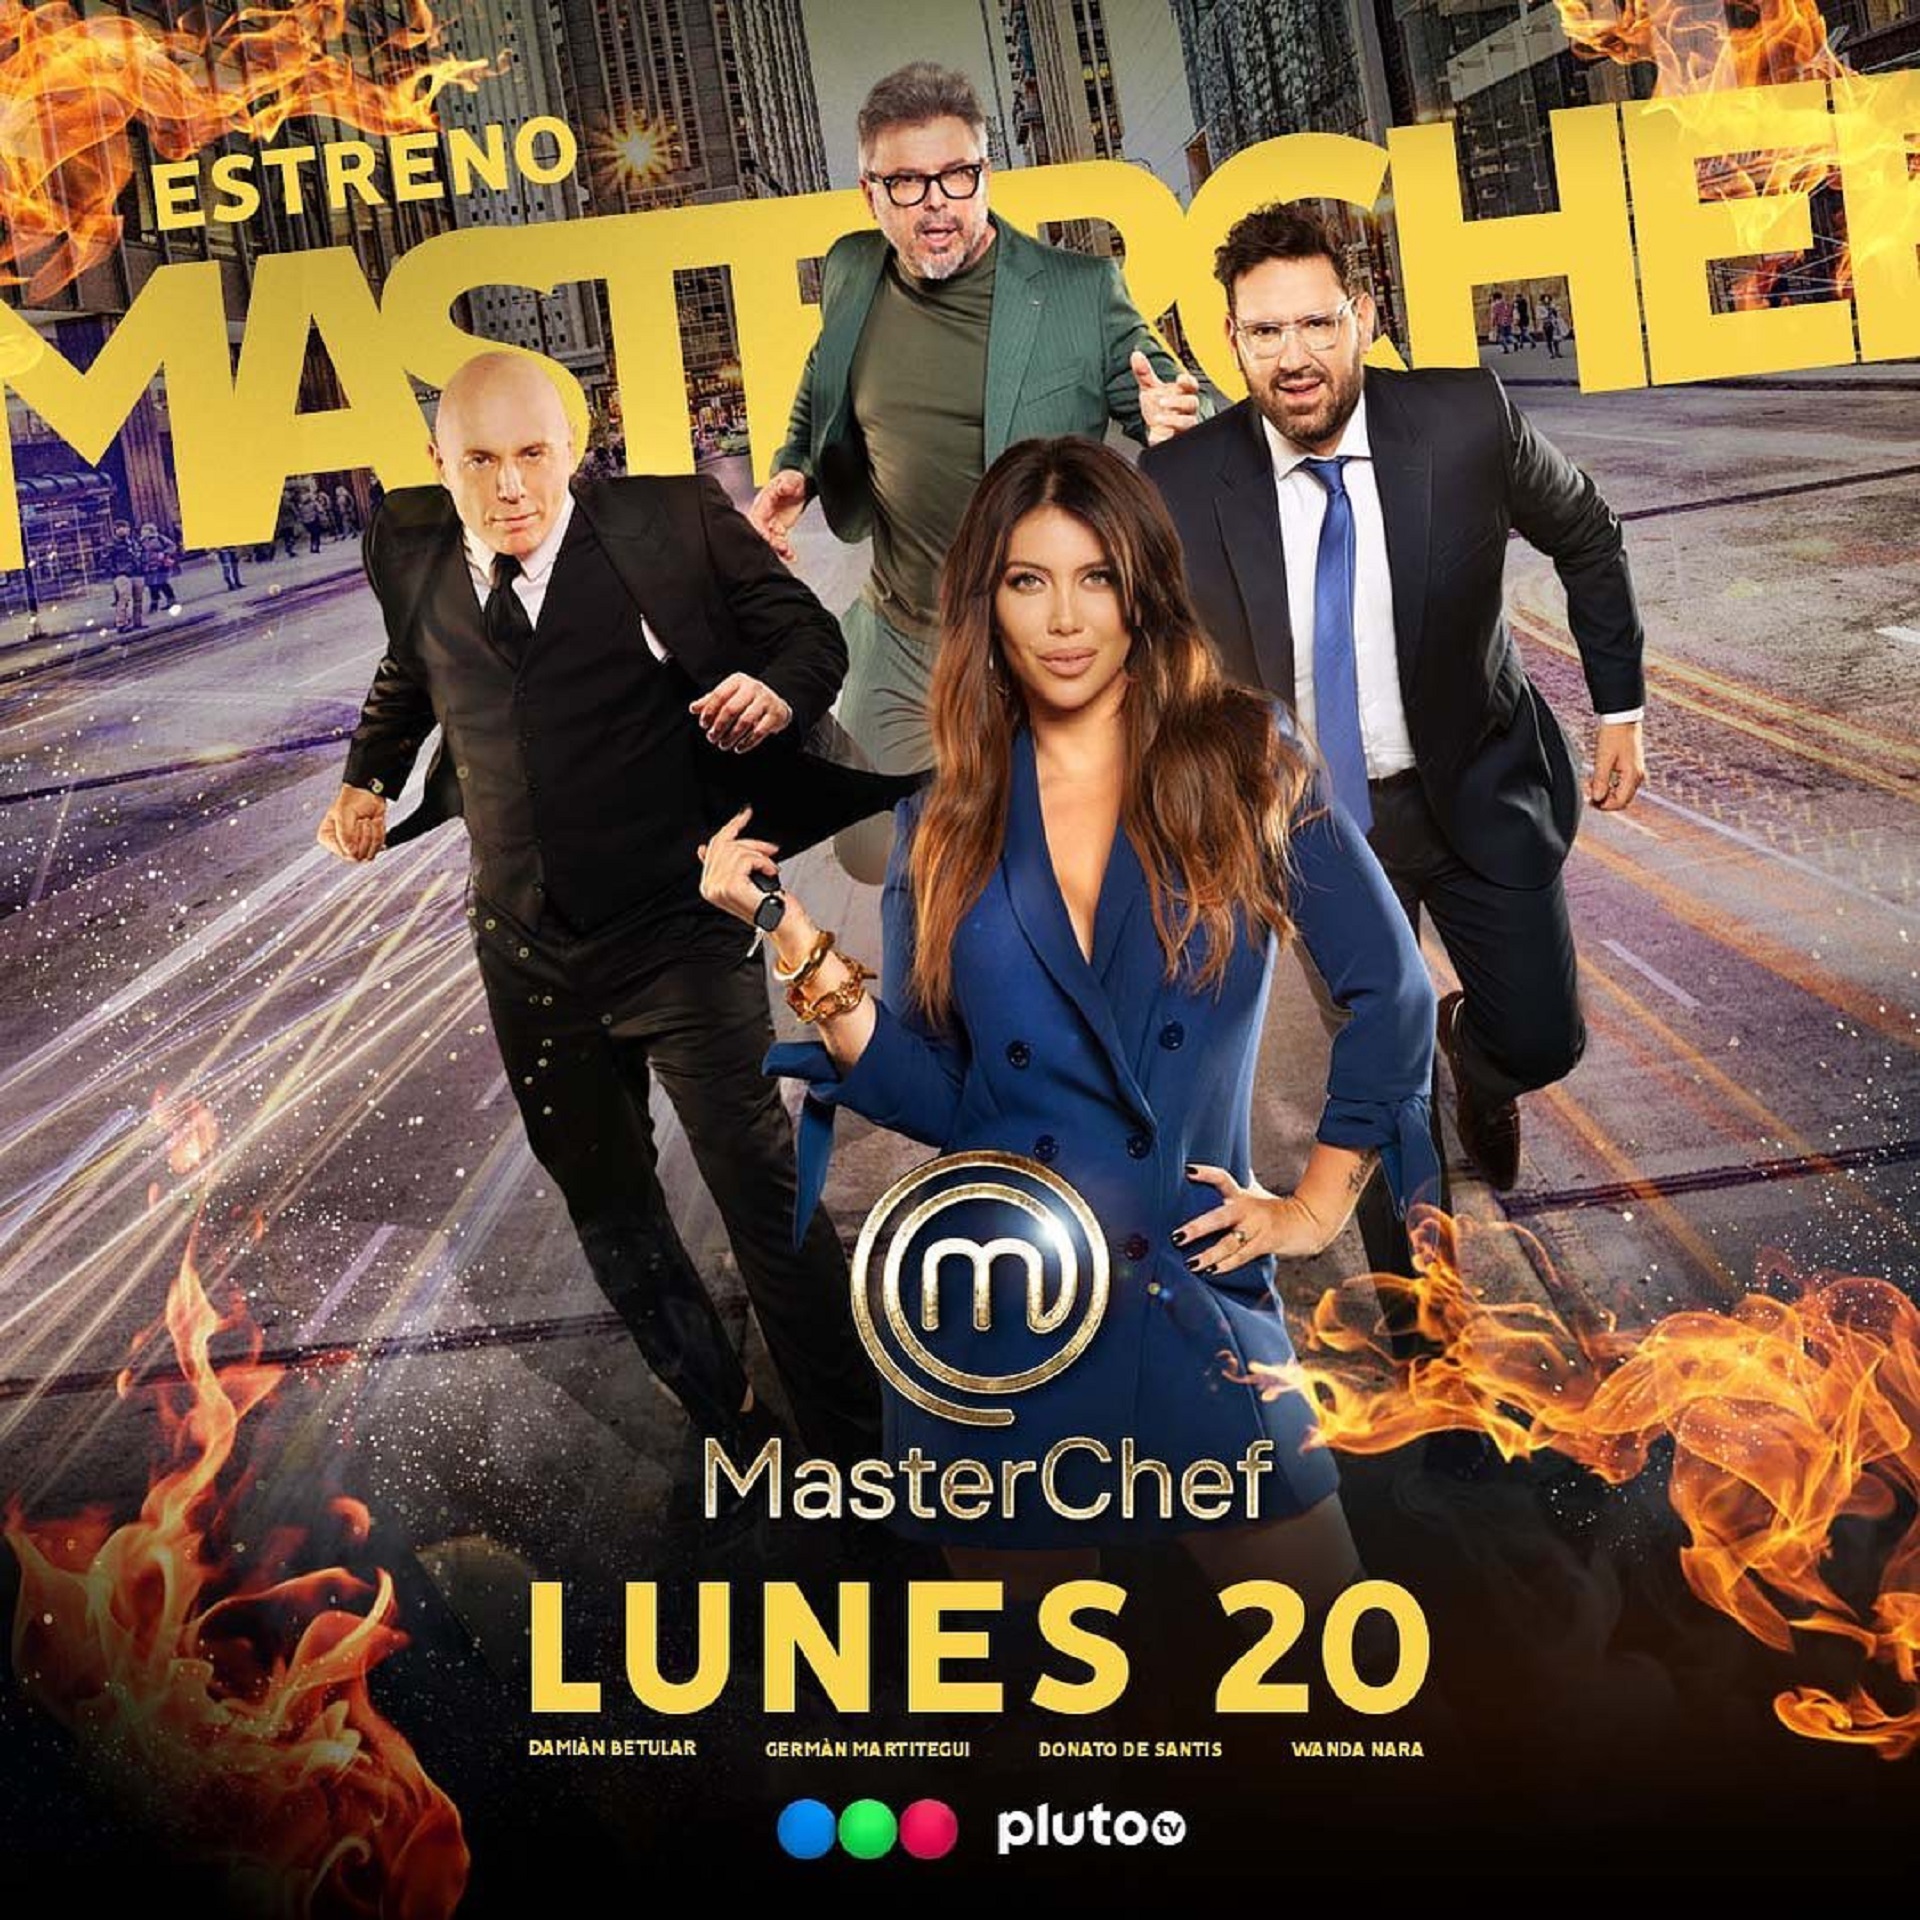 MasterChef begins on Monday, March 20 at 9:30 p.m. on Telefe